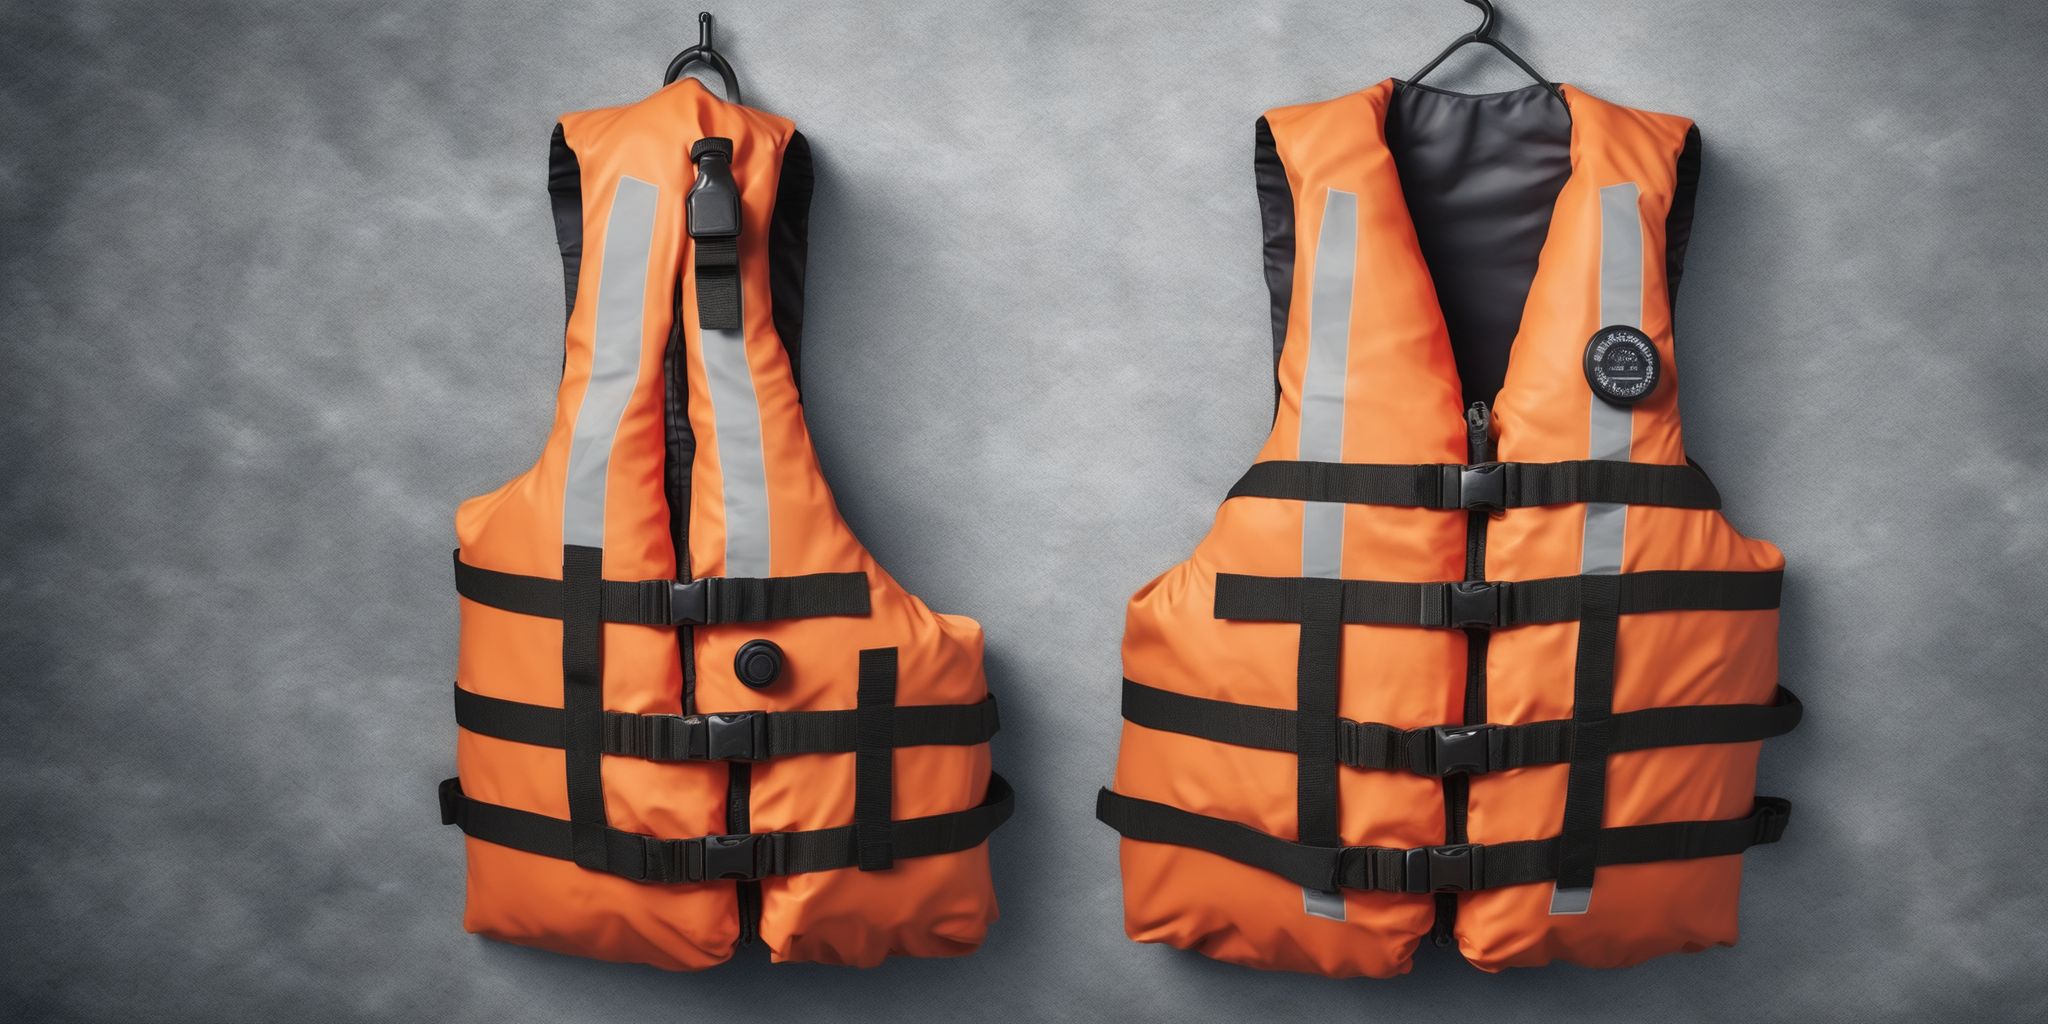 Life vest  in realistic, photographic style